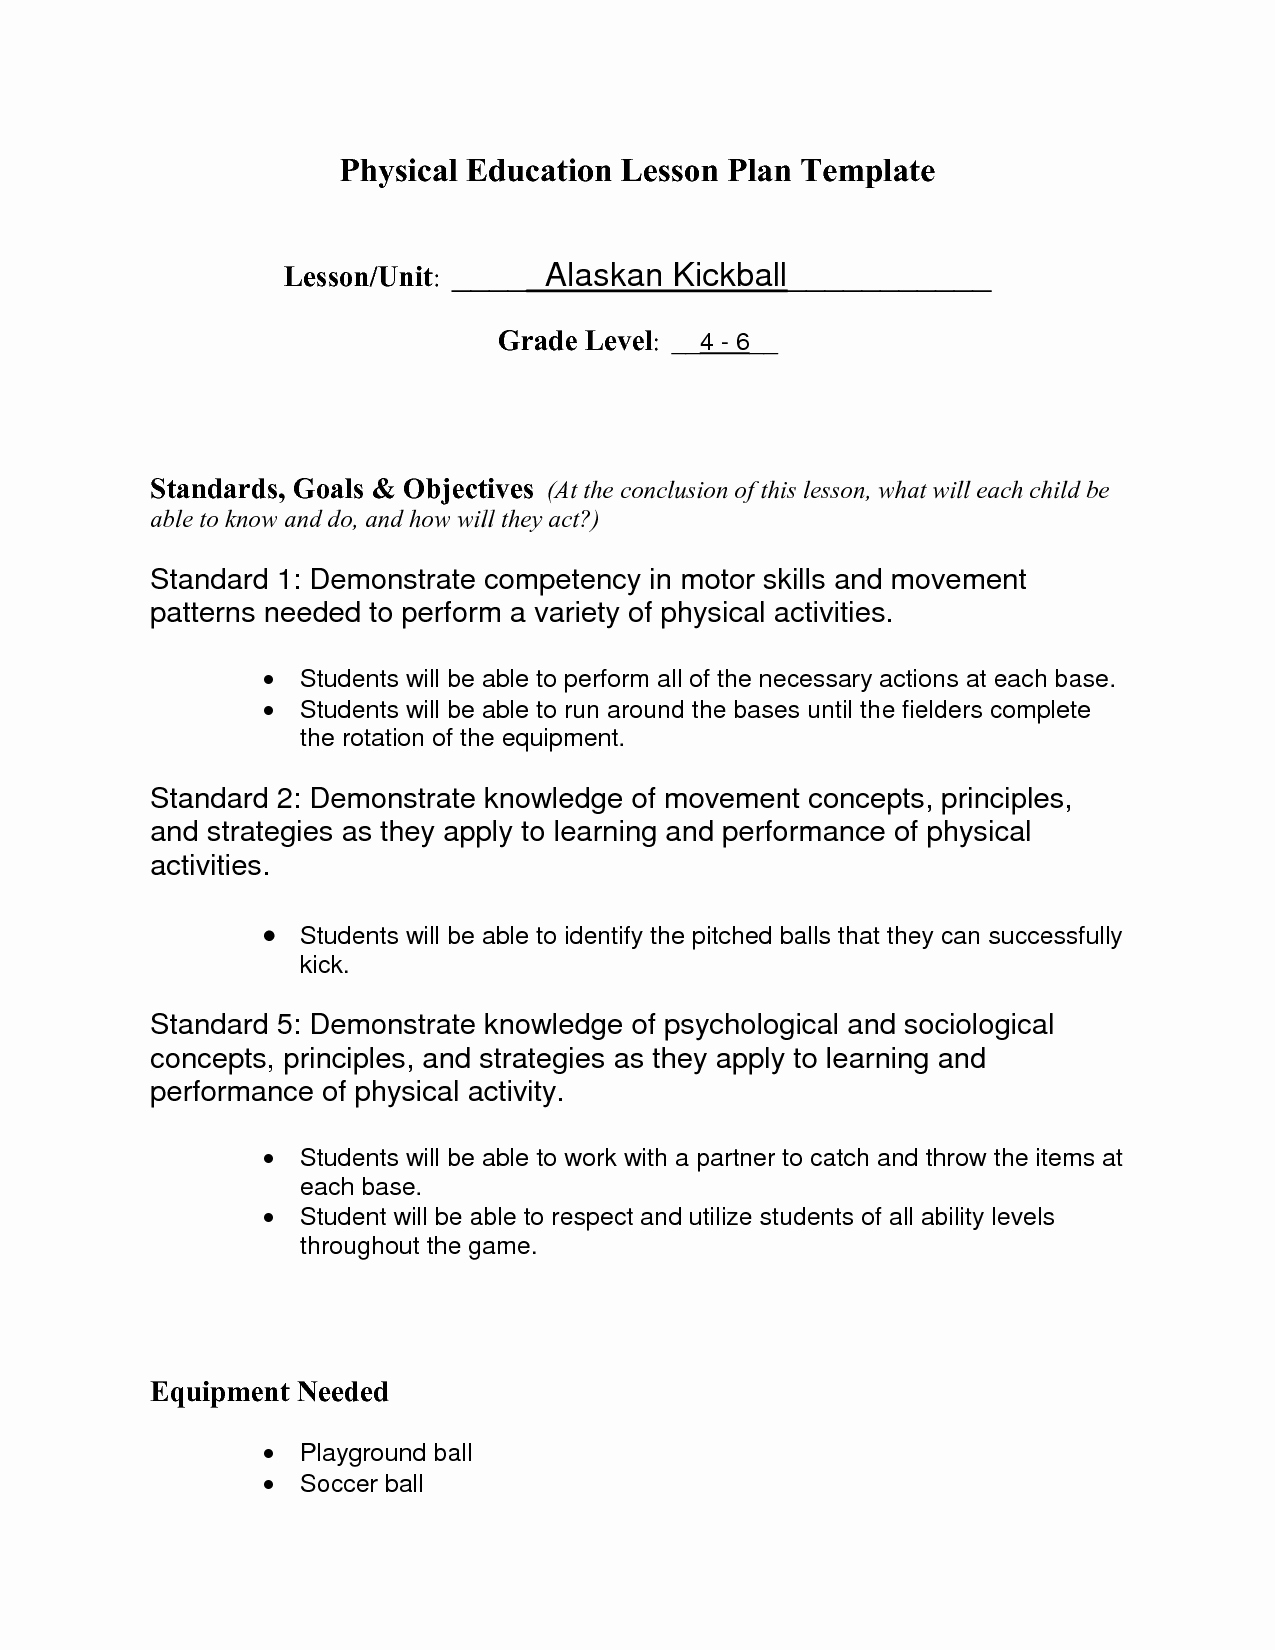 Physical Education Lesson Plan Template New Best S Of Physical Education Lesson Plan Template